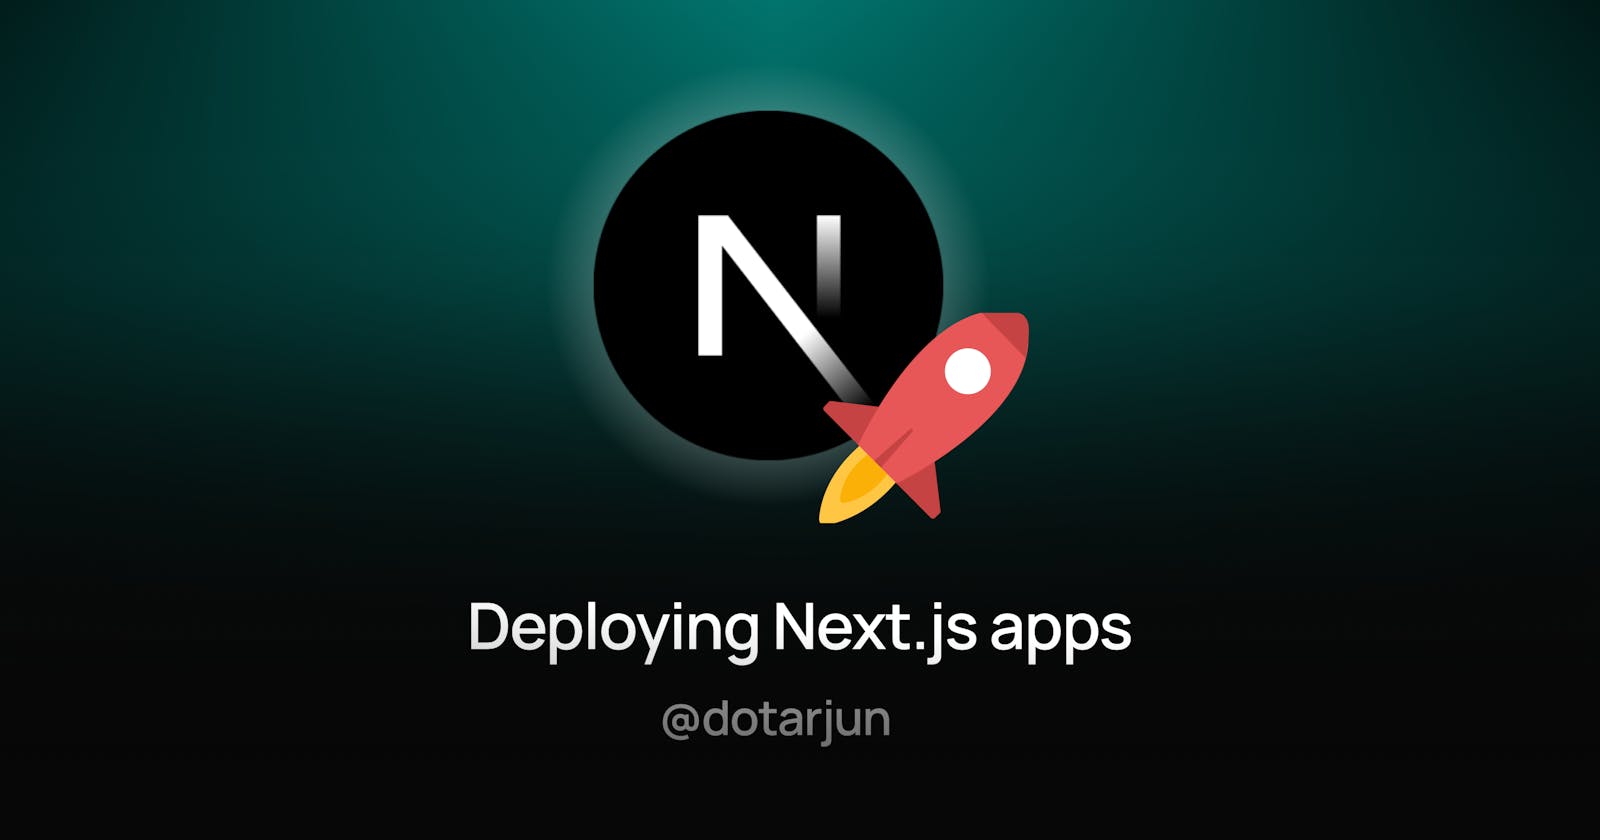 Learn the Best Way to Deploy Your Next.js App